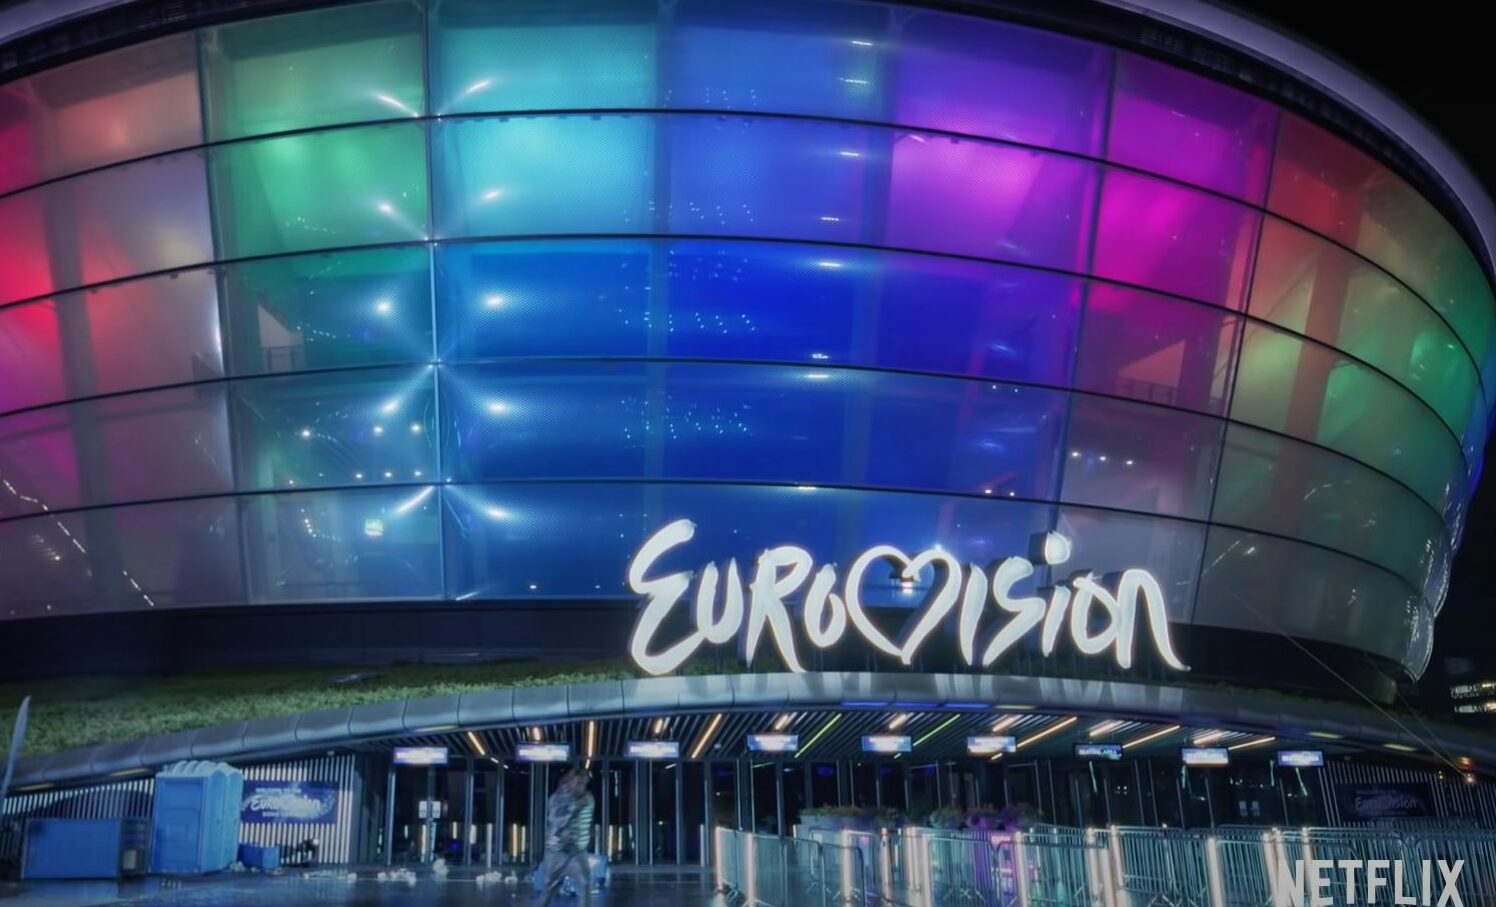 The OVO Hydro arena in Glasgow doubled as an Edinburgh venue in the Netflix Eurovision film